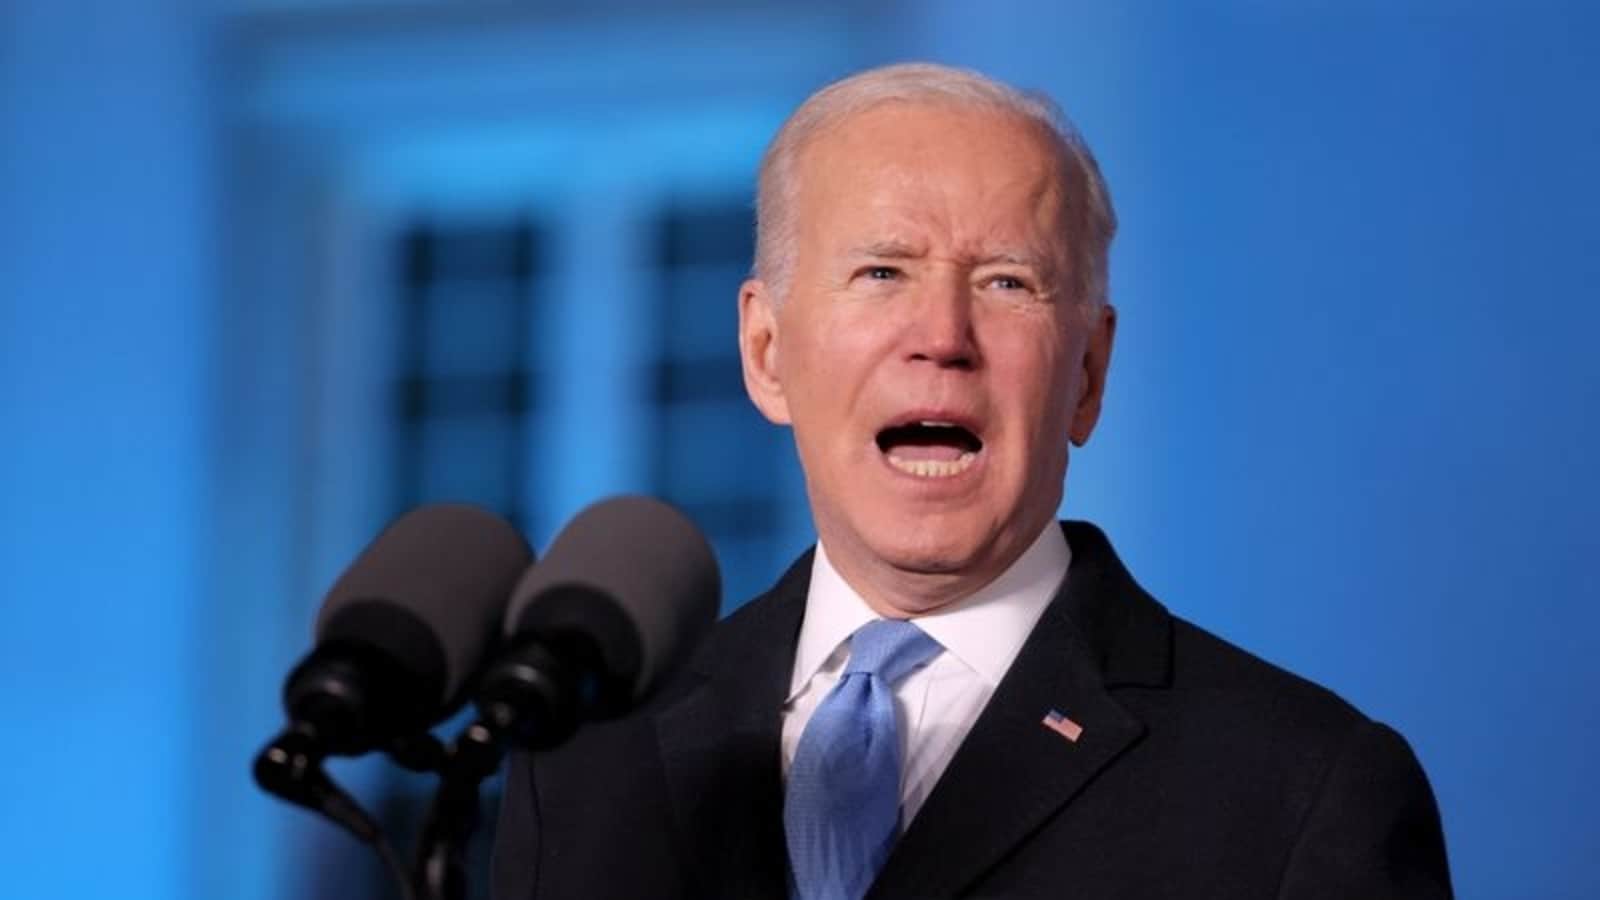 Morning brief: White House clarification on Biden’s ‘Putin can not remain in power’ remark, and all the latest news